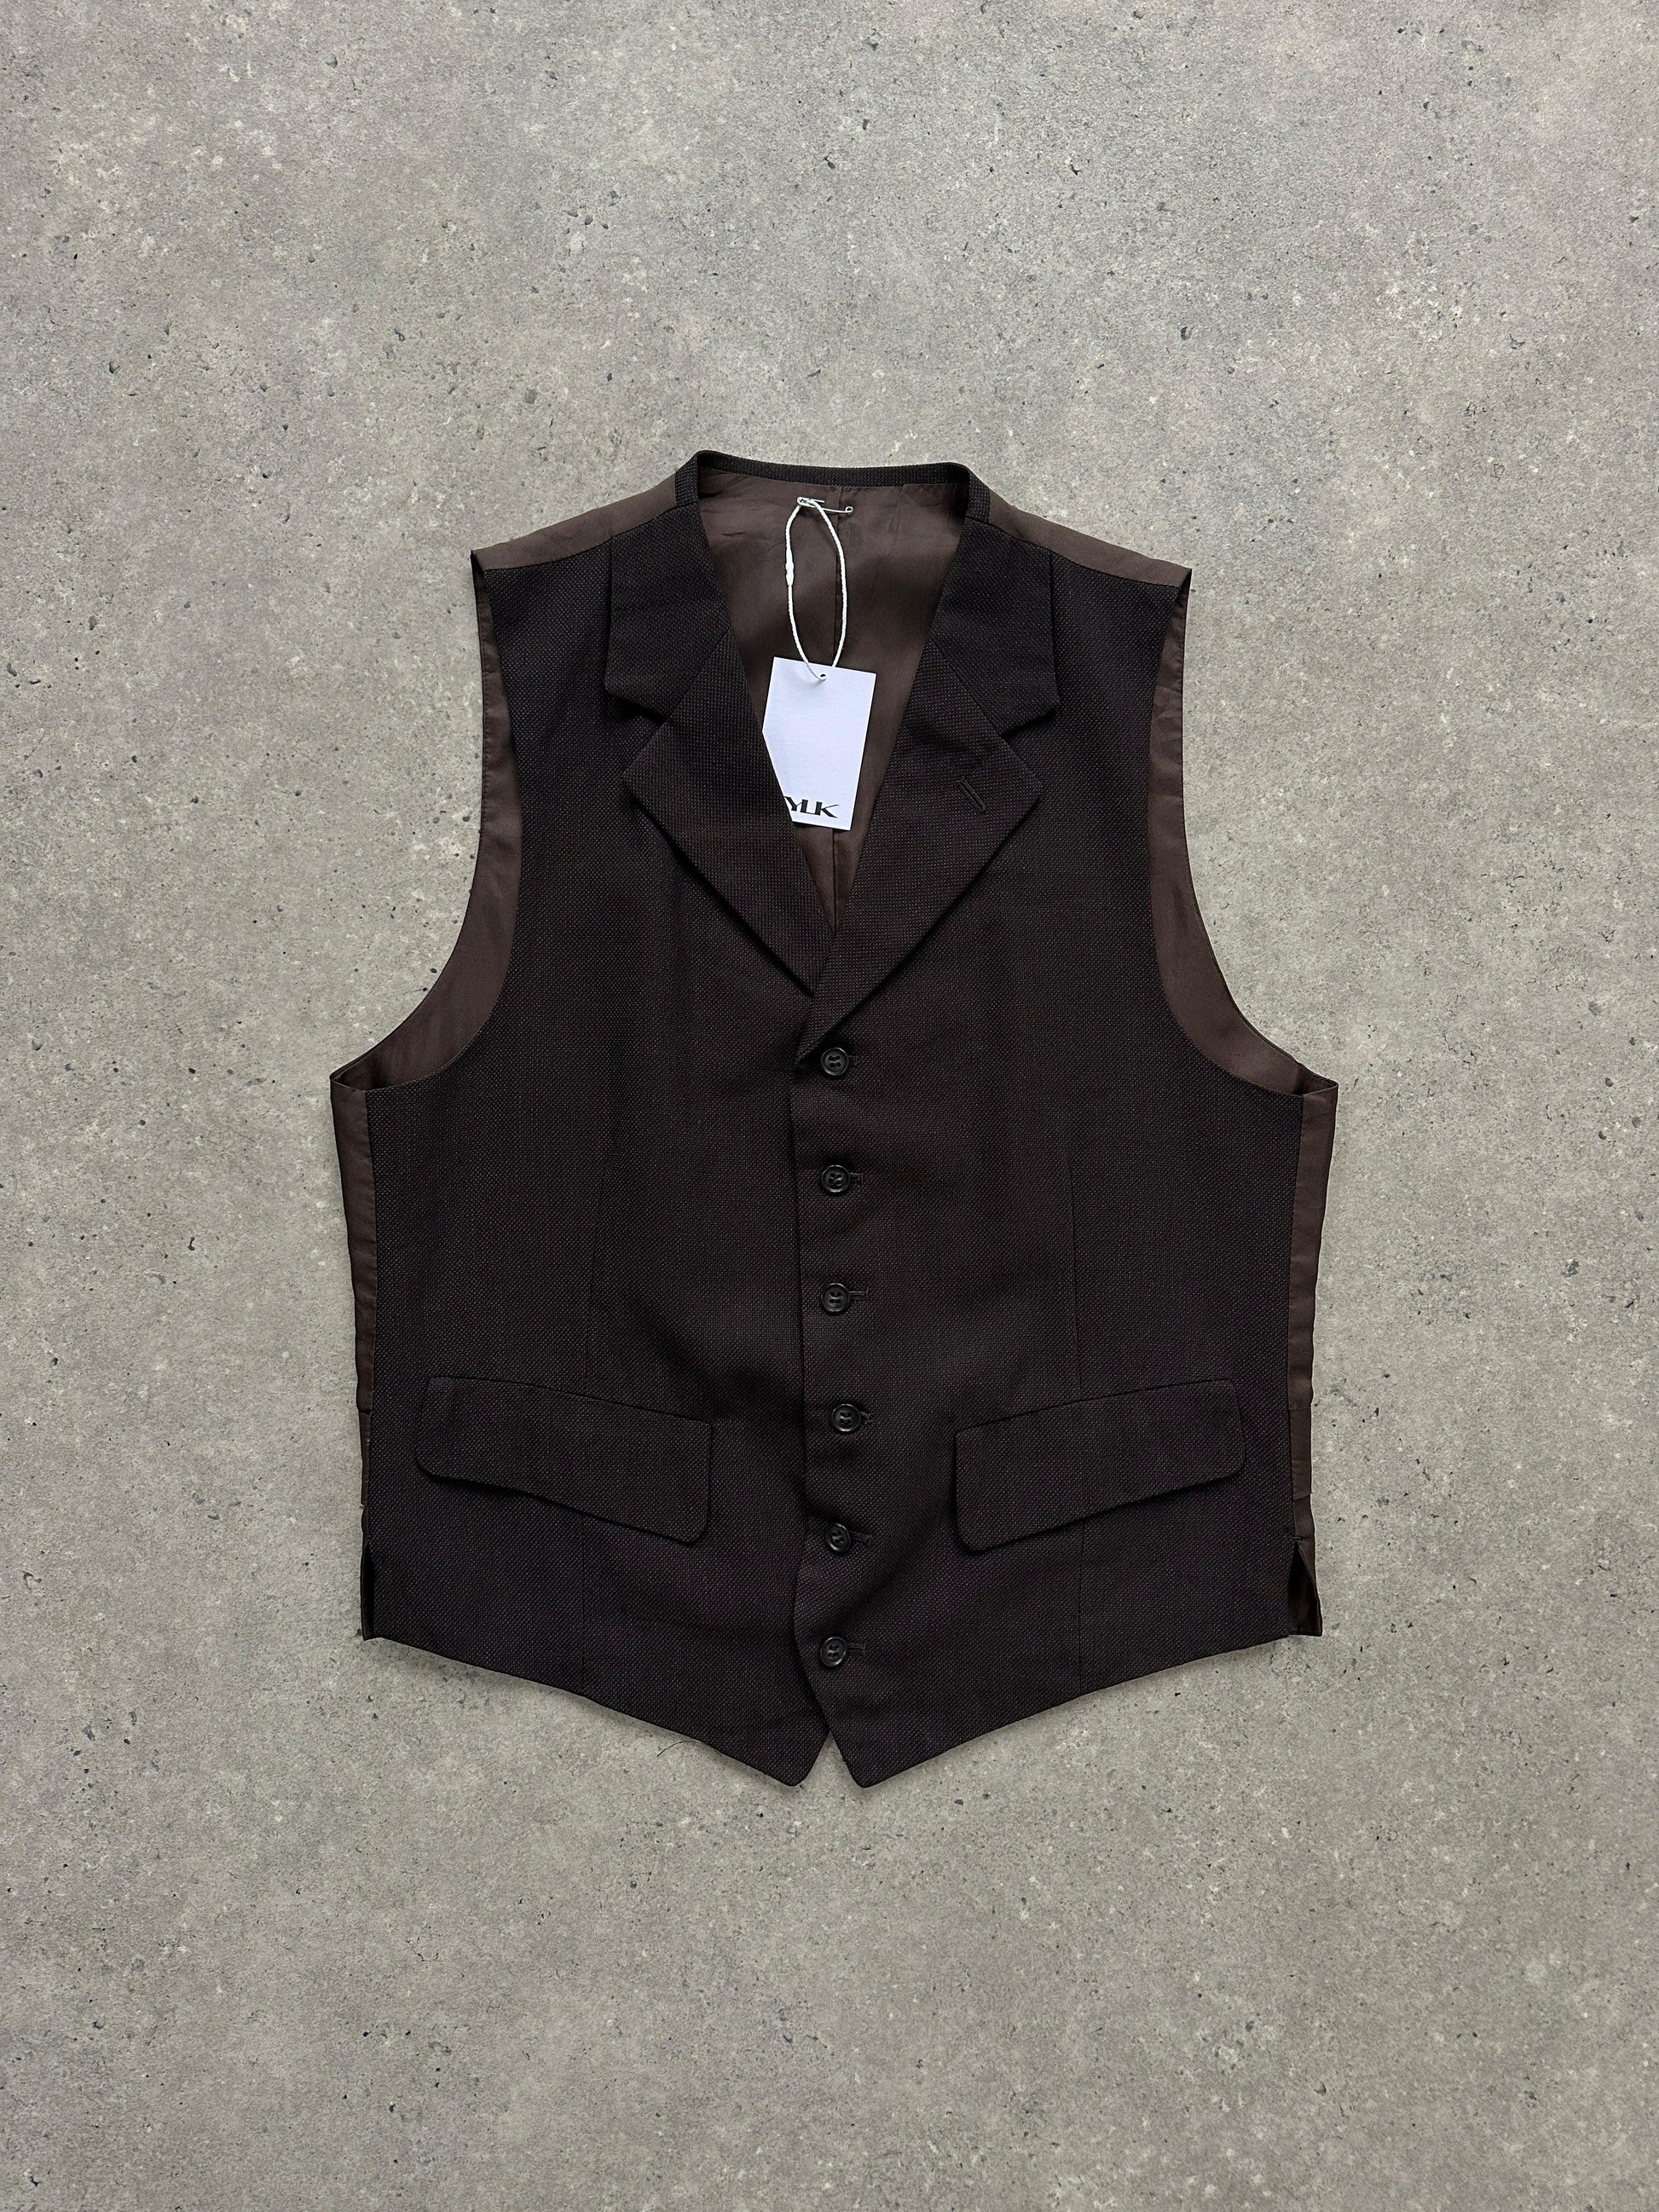 Vintage Pure Wool Collared Waistcoat - M - Known Source